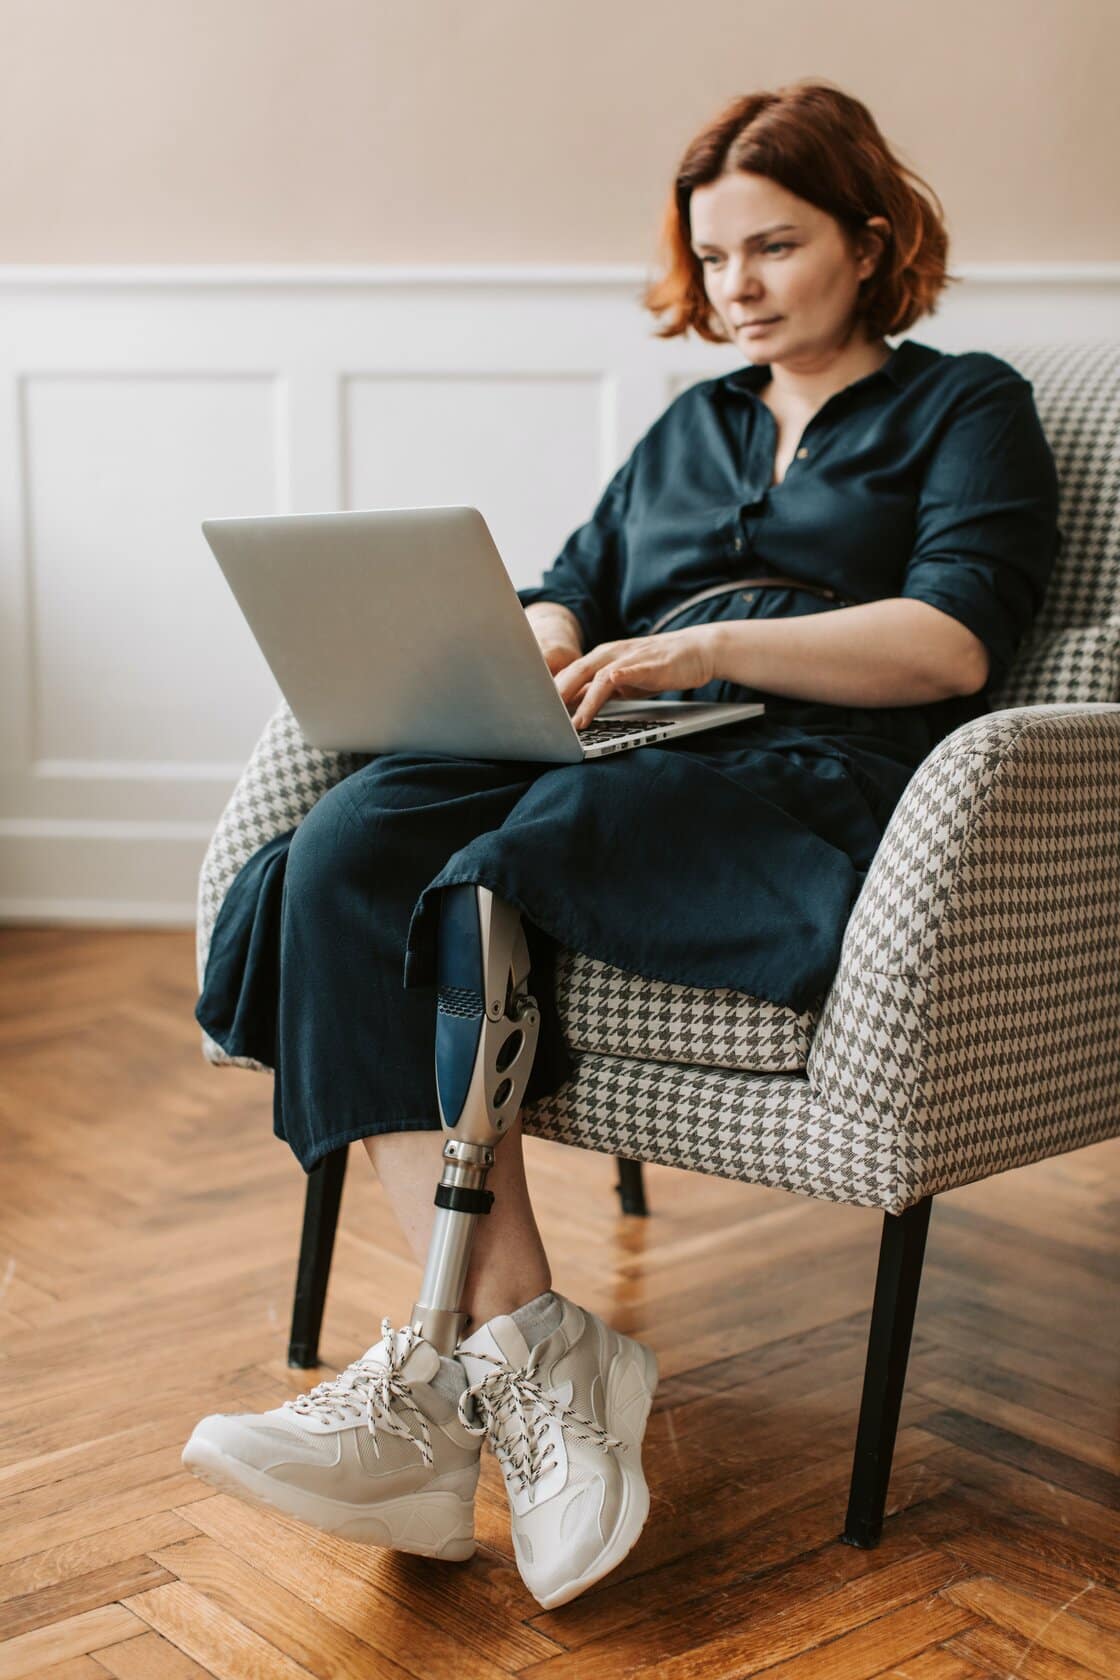 Lady sat in a chair, she has a lower limb amputation with prostecic leg. She is looking at her laptop, she is taking a loss of limb counselling session